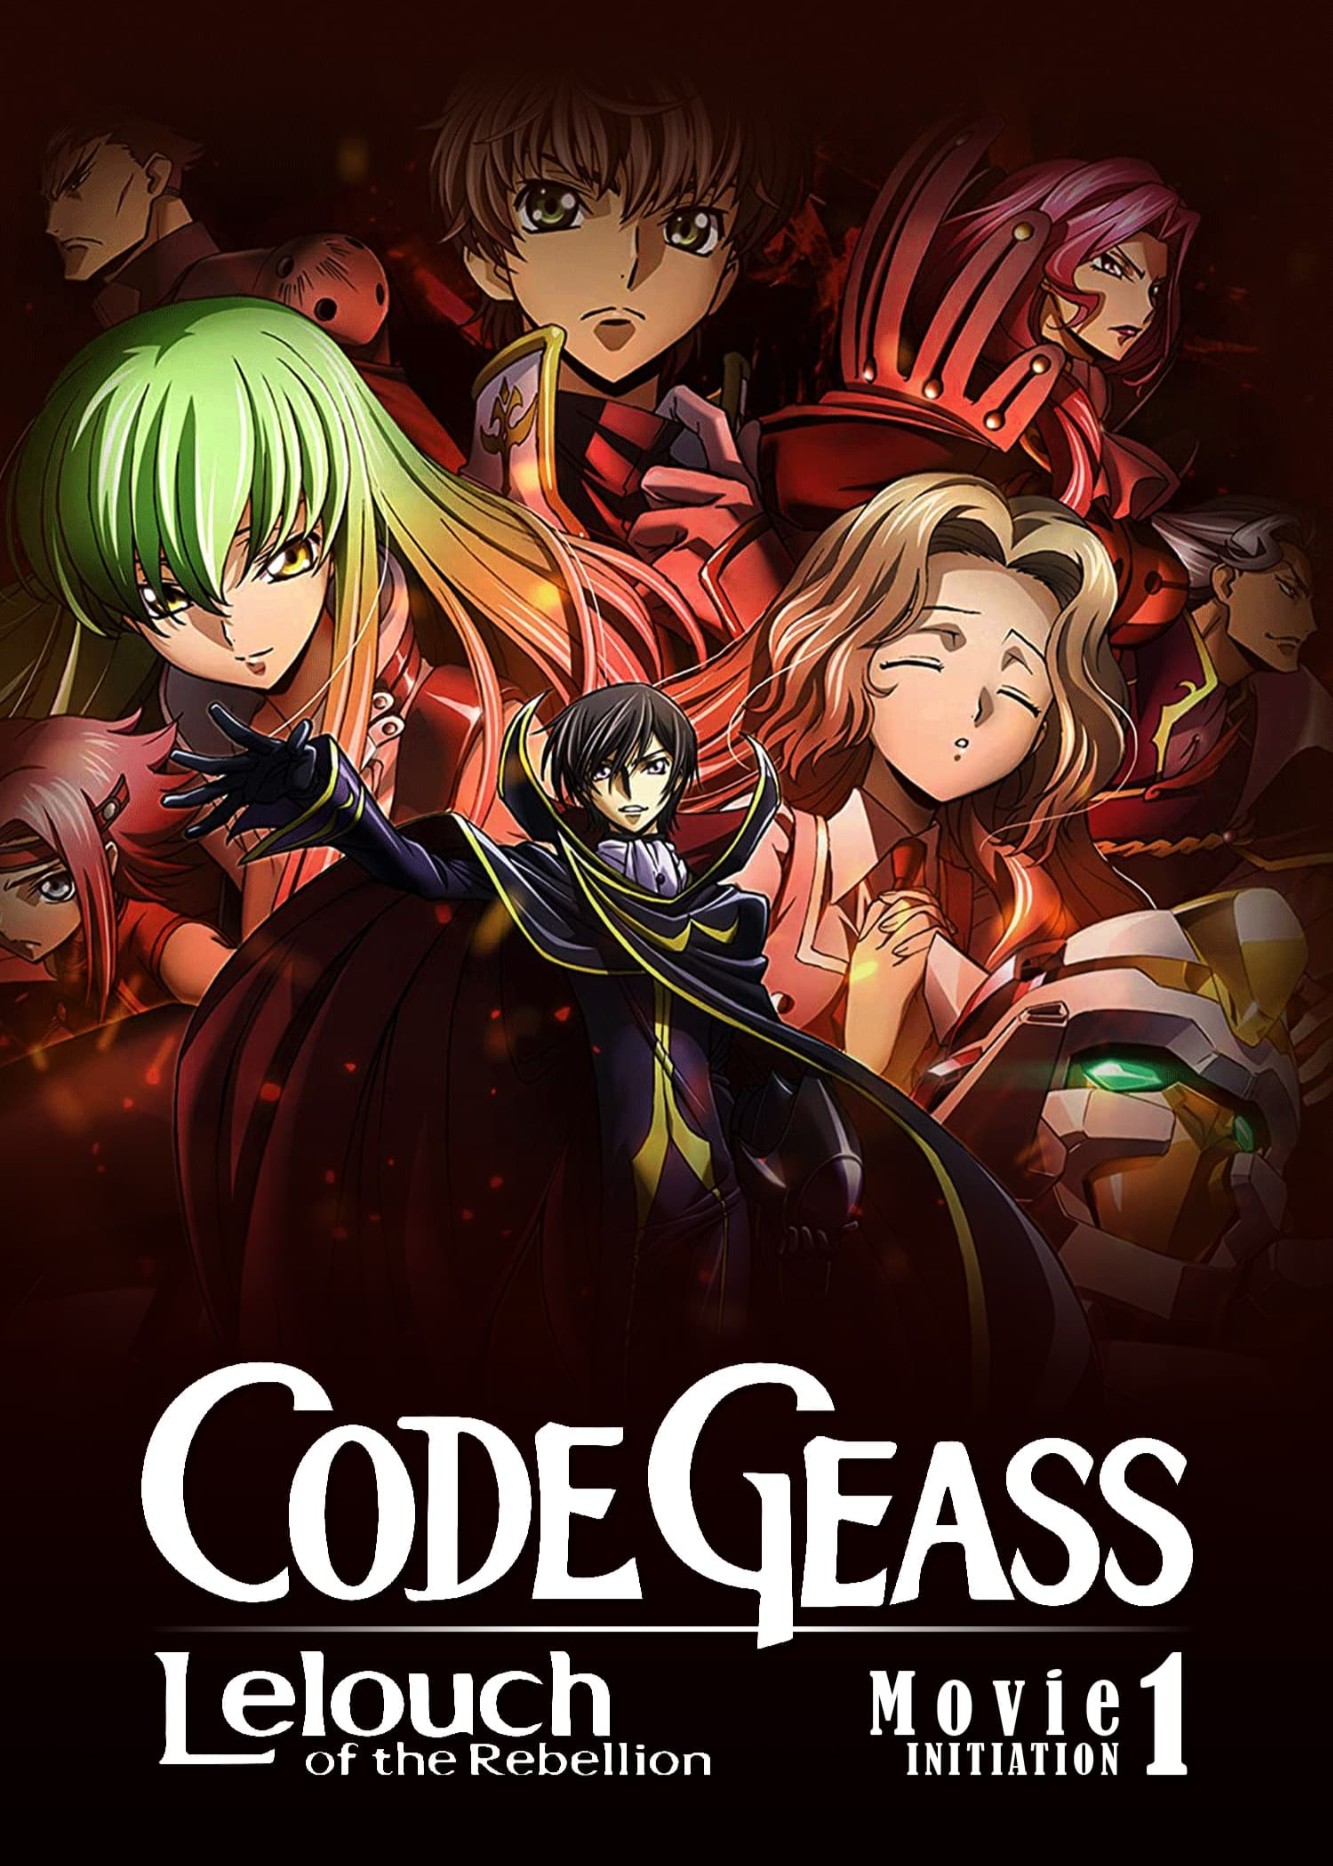 Code Geass: Lelouch of the Rebellion I - Initiation 2017